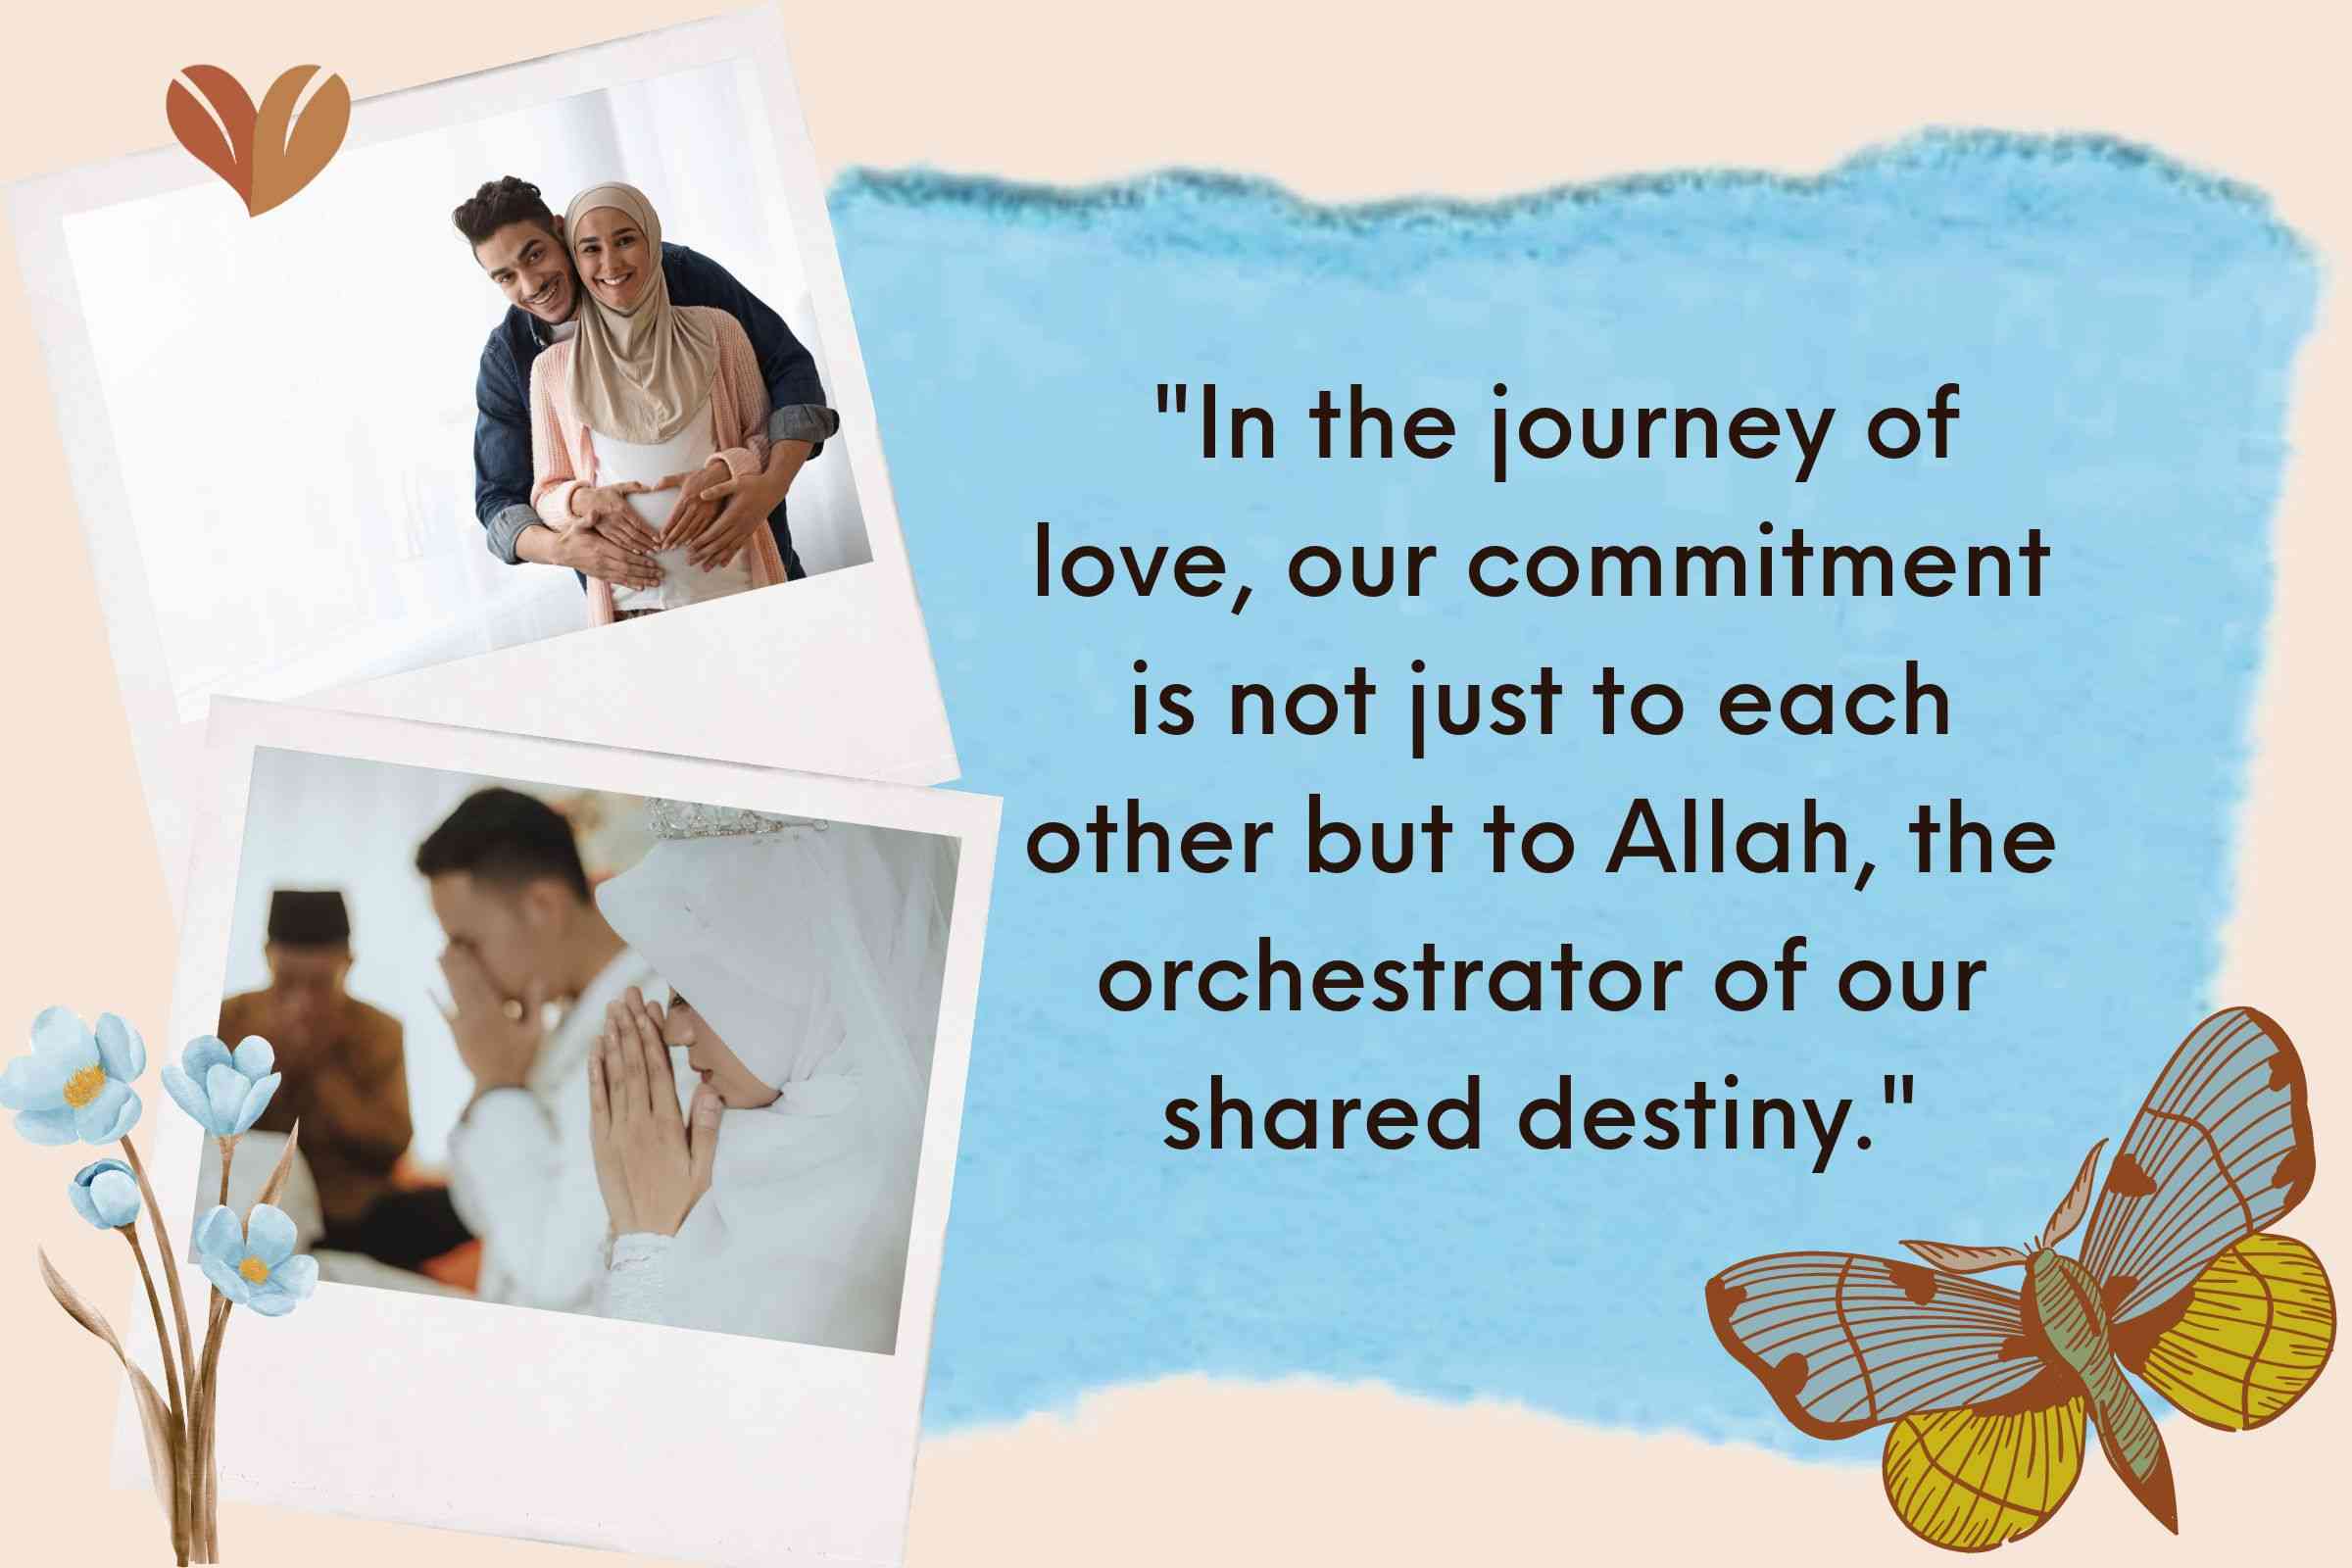 In the journey of love, our commitment is not just to each other but to Allah